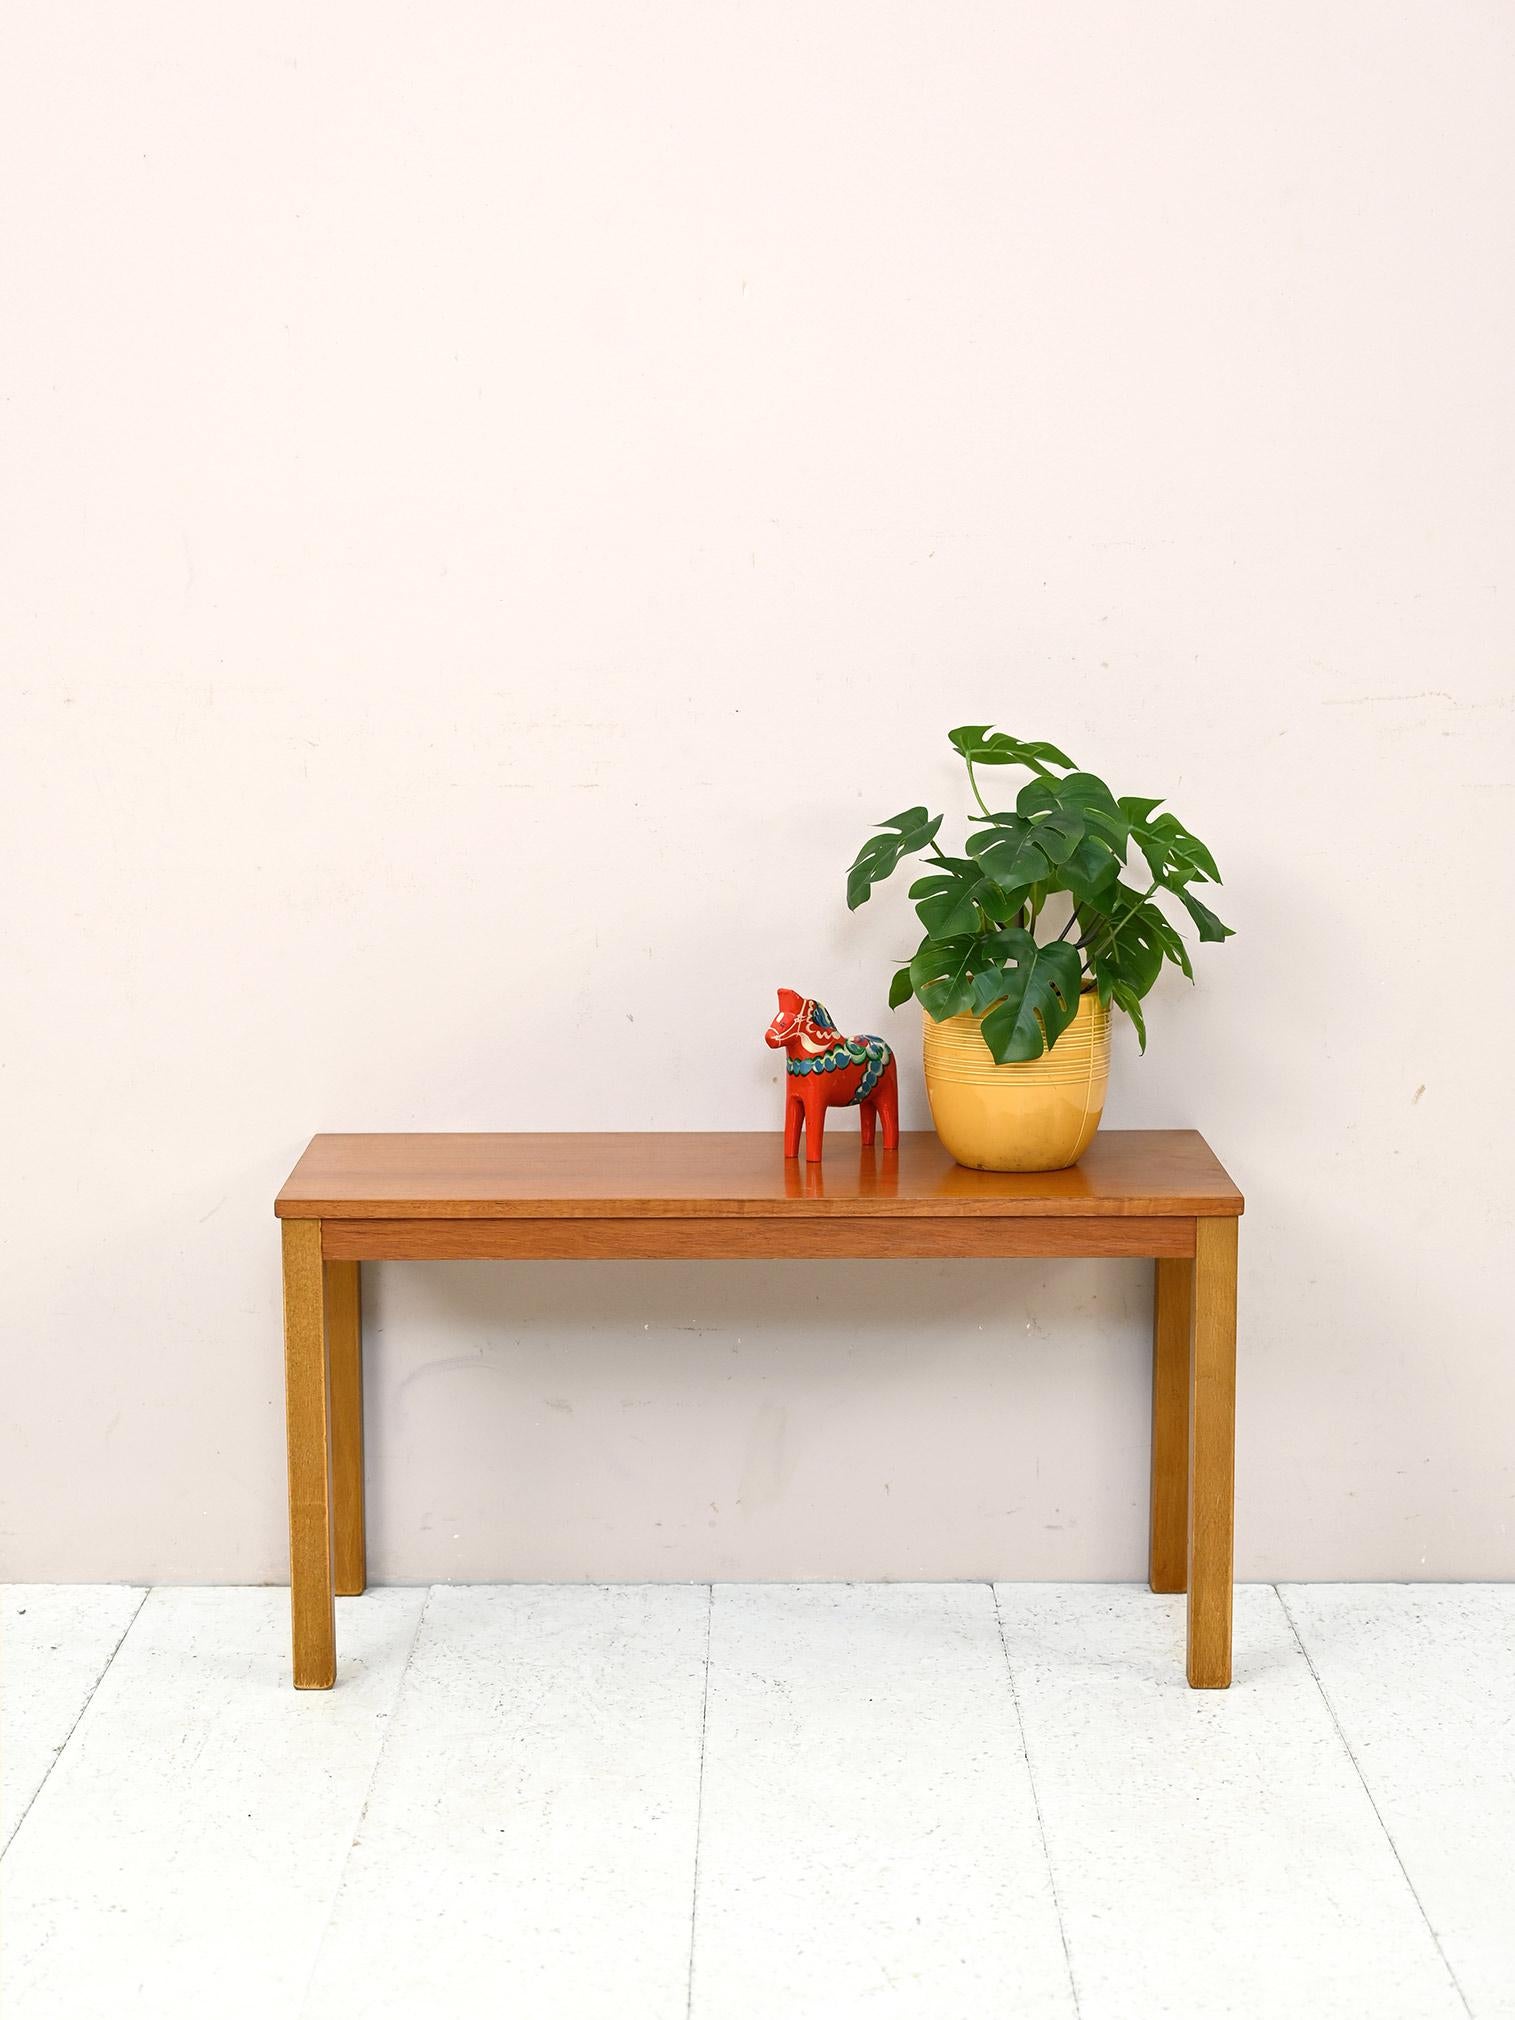 Original Scandinavian bench from the 1960s.

A piece of furniture with small dimensions and typical scandi style.
It can be used as a sofa table but also as a bench to embellish an entryway or bedroom.

Good vintage condition. A conservative